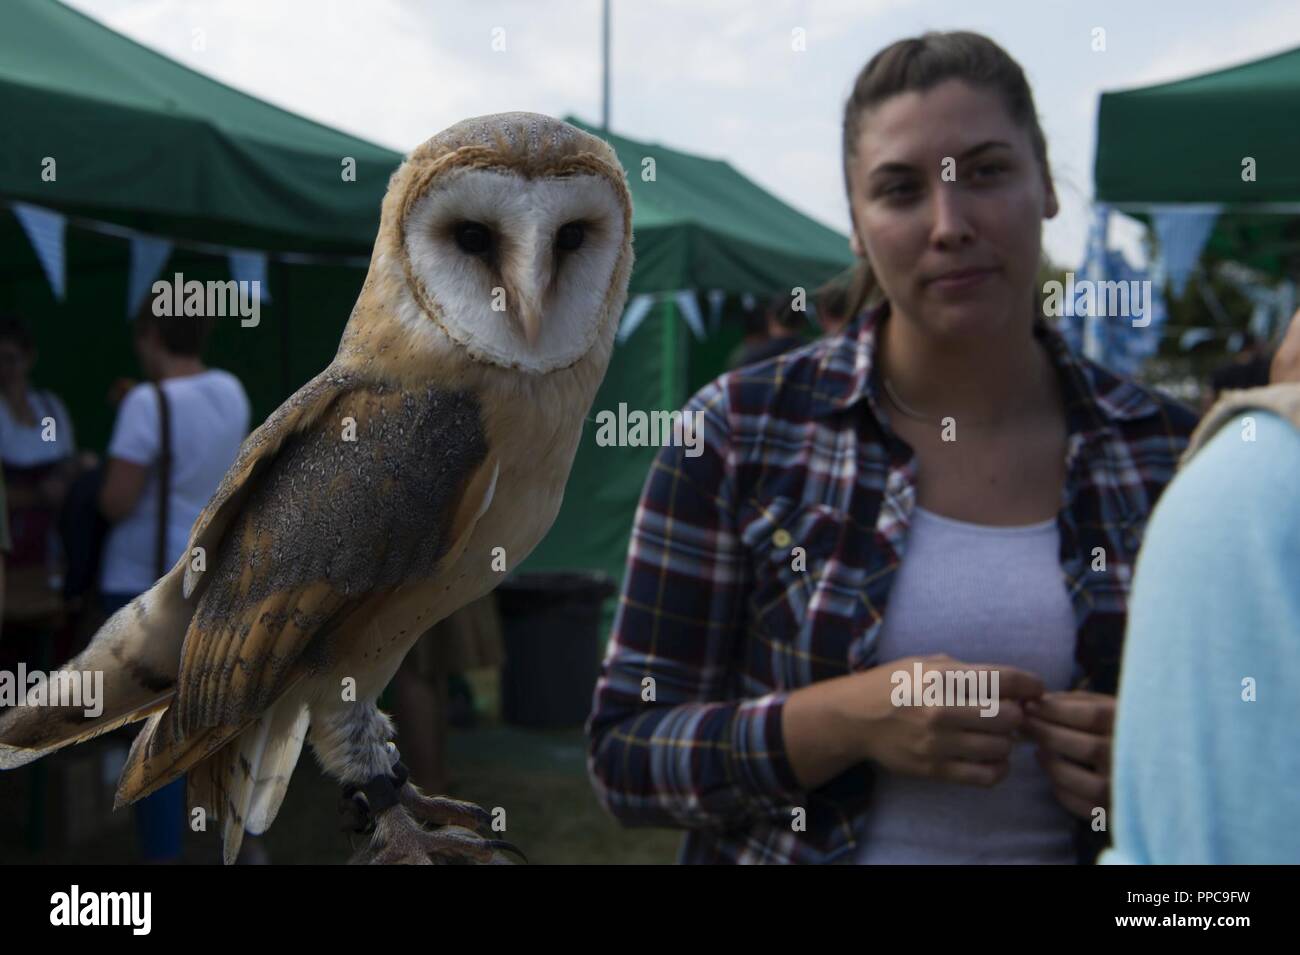 Ida the owl poses for a photo during Multicultural Awareness Day at Spangdahlem Air Base, Germany, Aug. 17, 2018. The event also featured sheep that could be fed and a pettable bull. Stock Photo